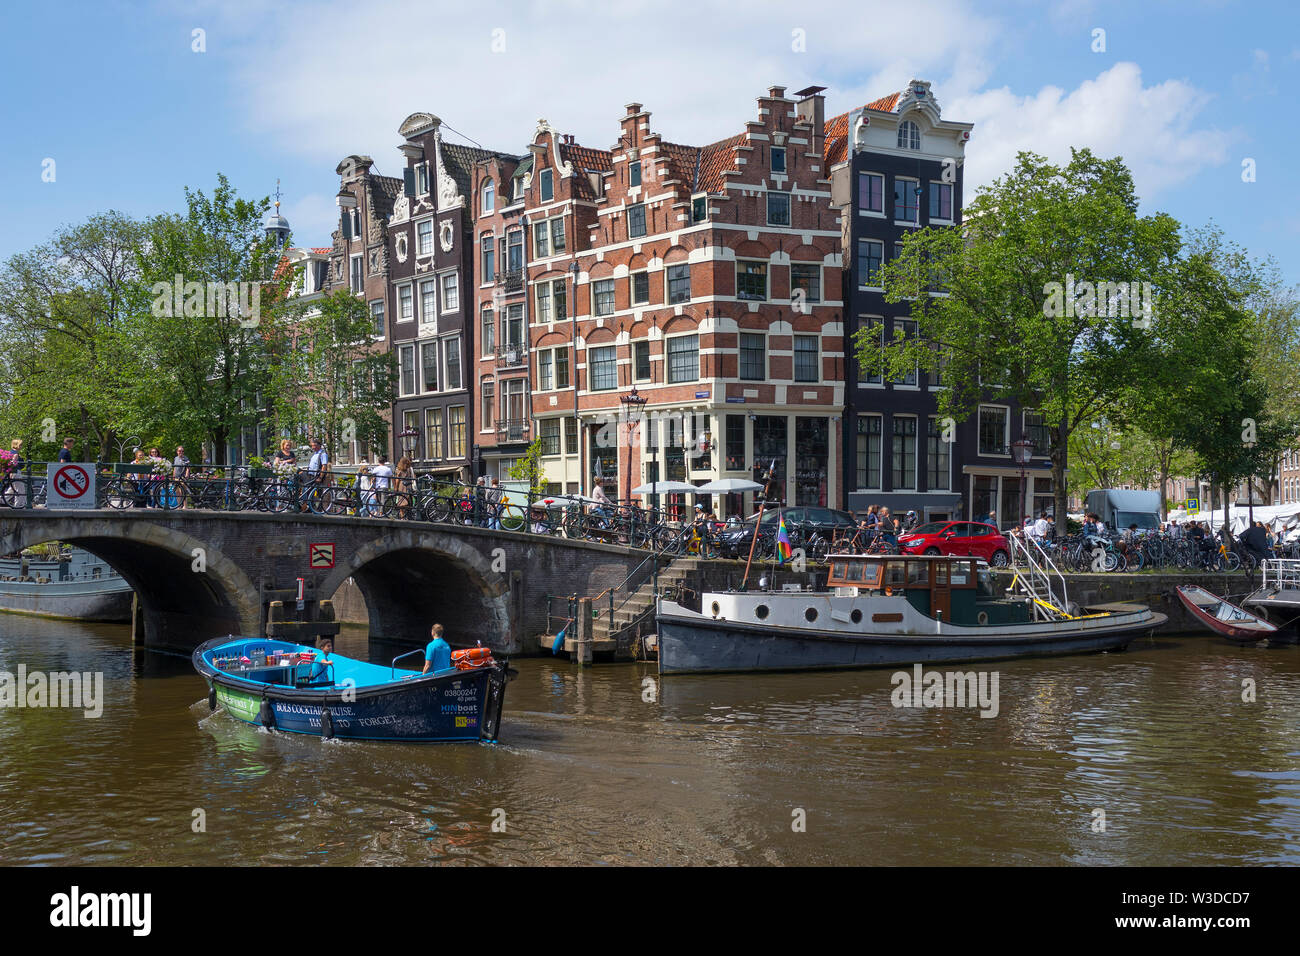 Amsterdam, Holland - June 22, 2019: Touring boat at the Brouwersgracht on a sunny day Stock Photo